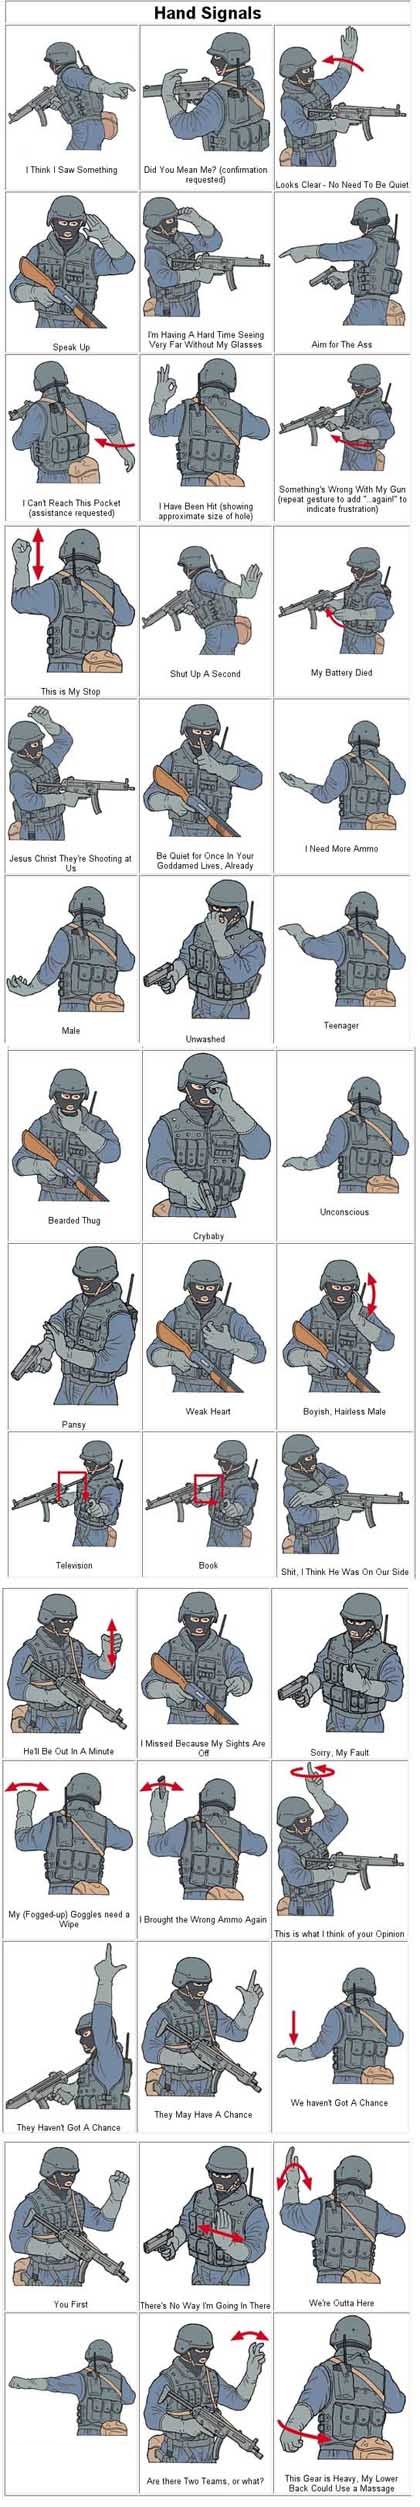 Funny Picture - SWAT Team Hand Signals